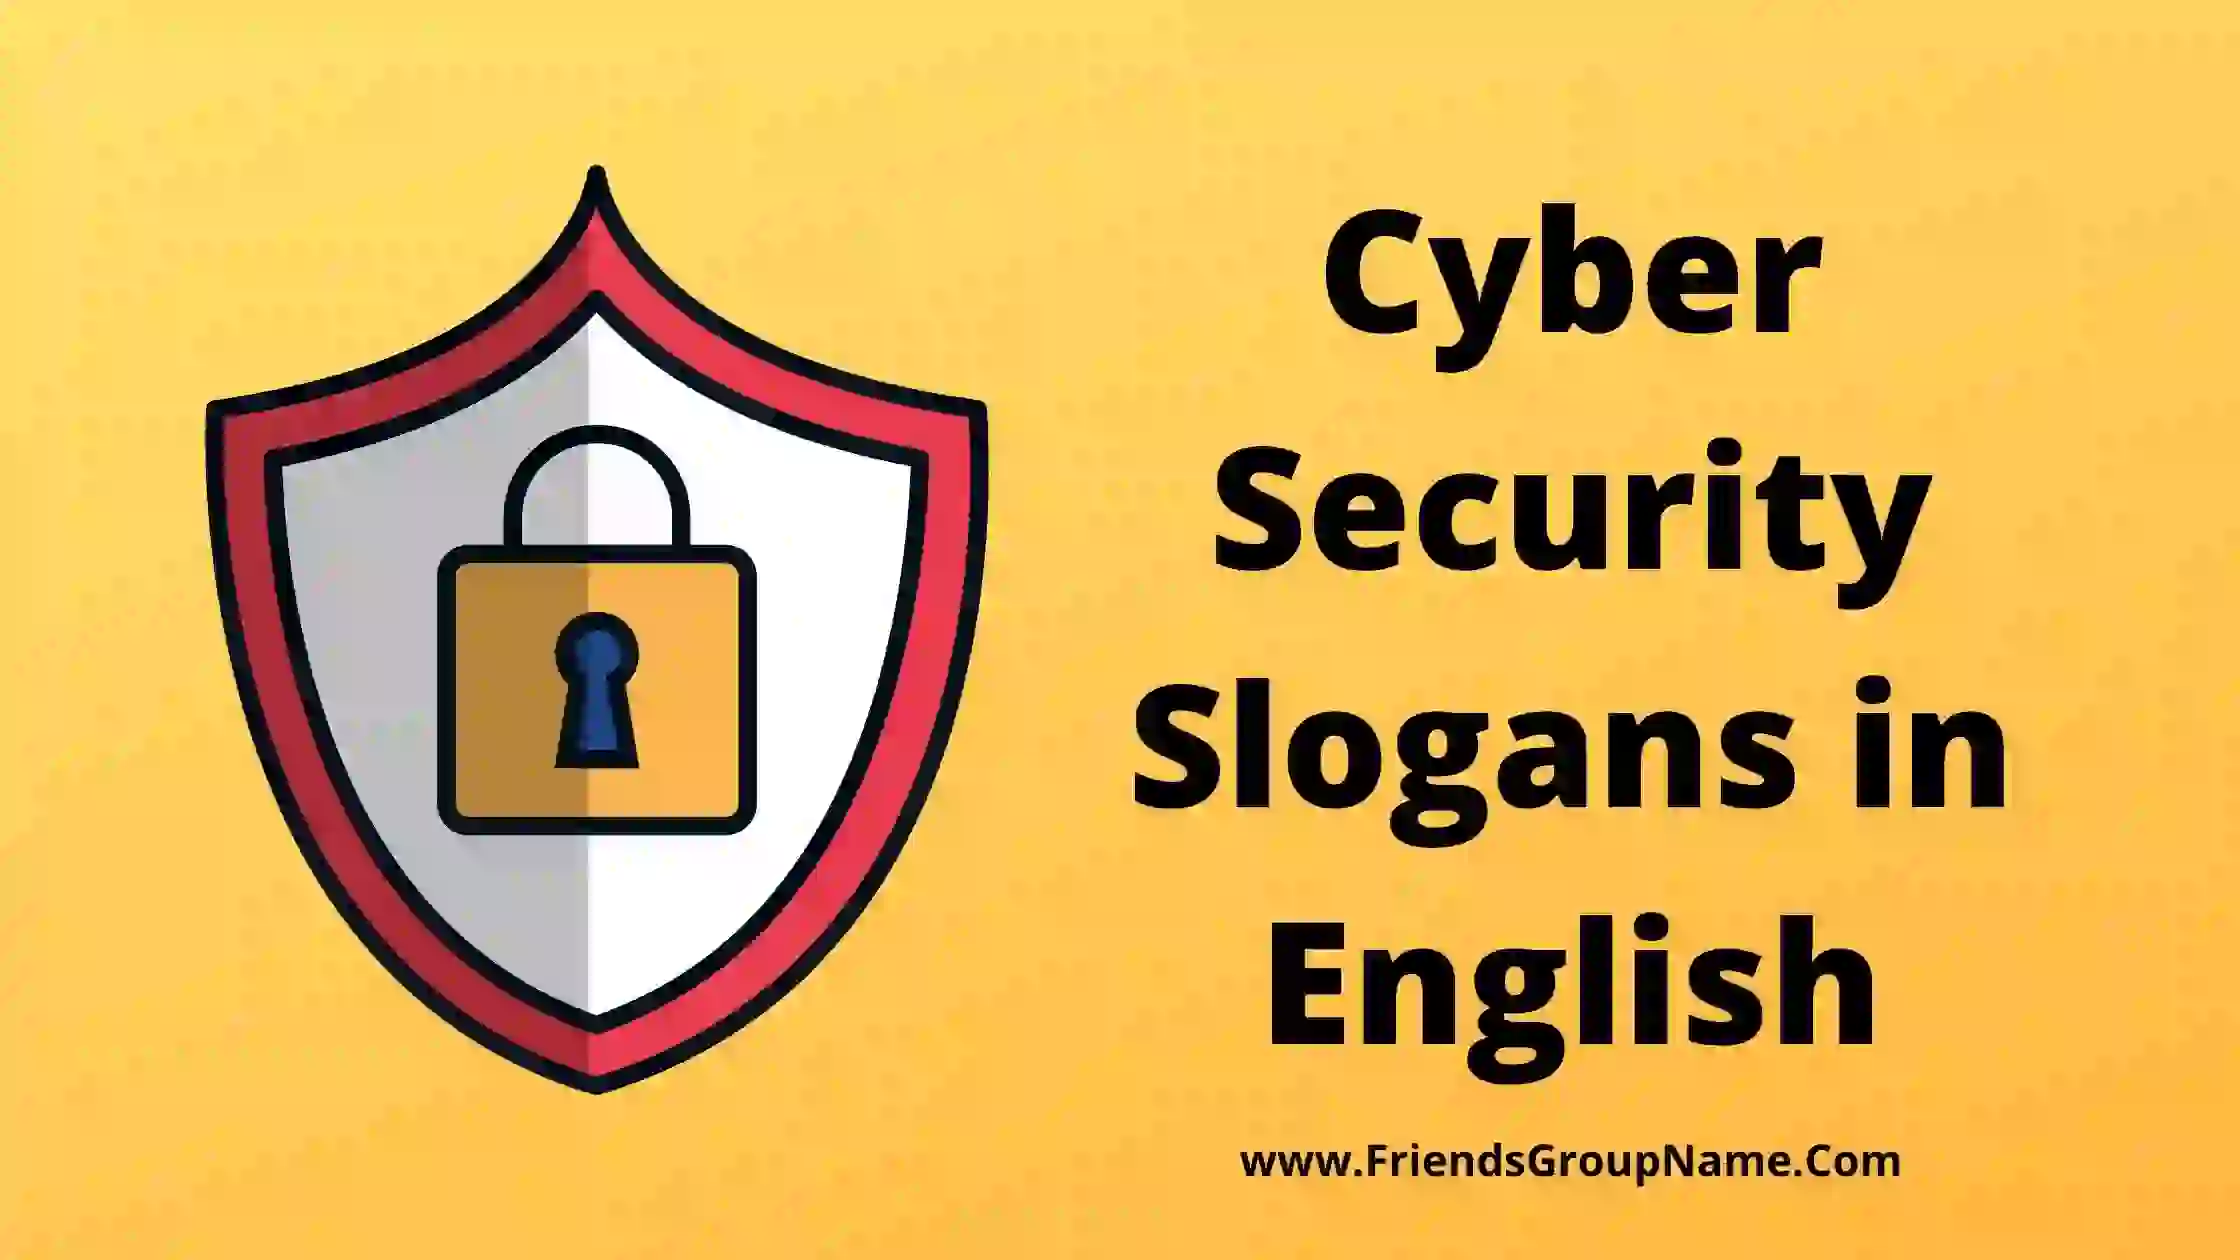 Cyber Security Slogans in English